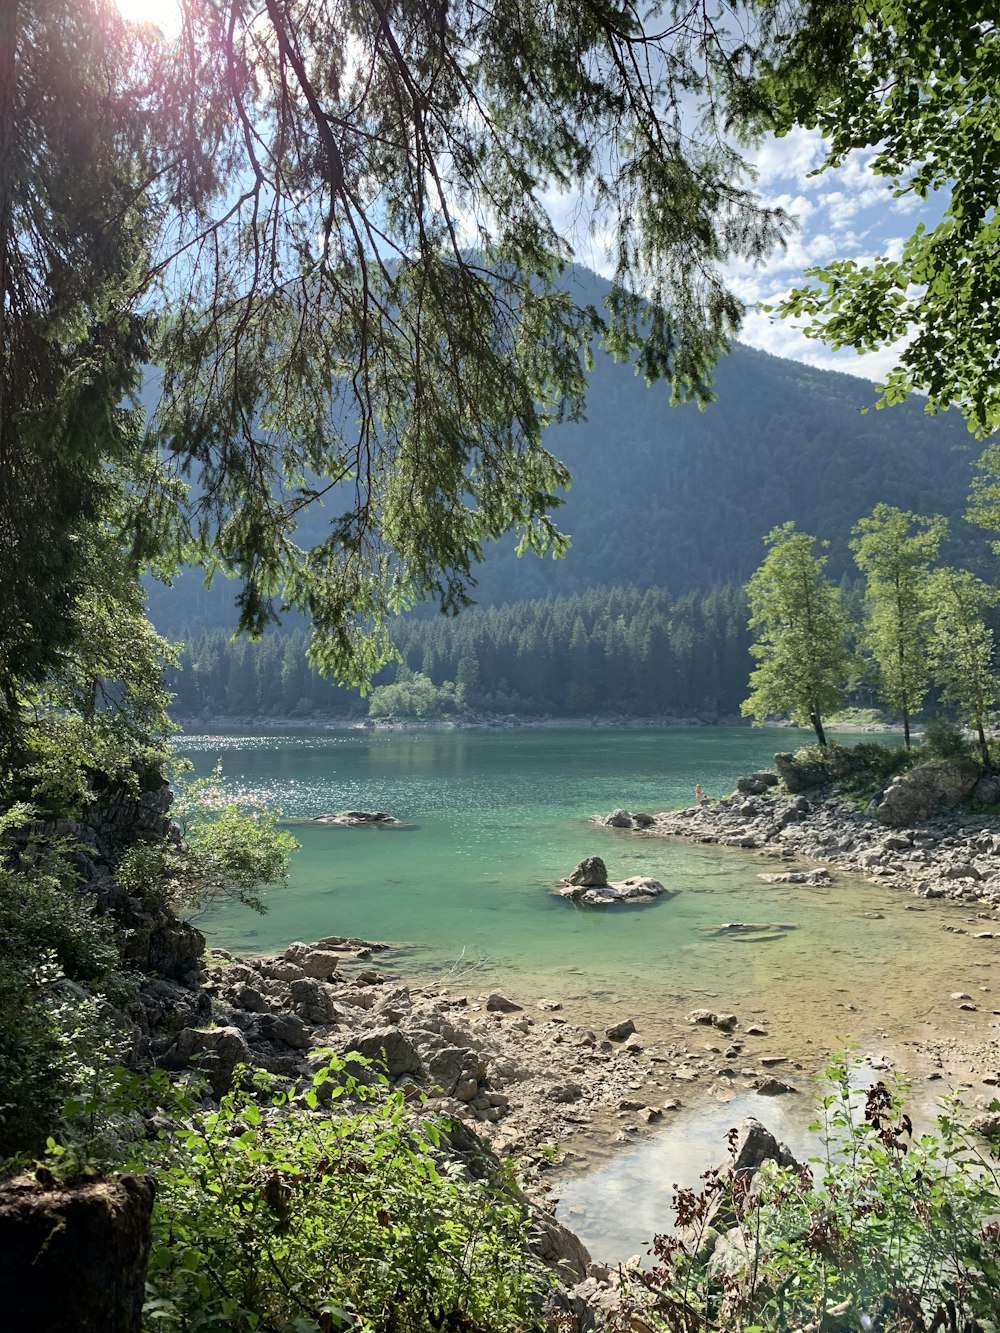 a body of water with trees and rocks around it